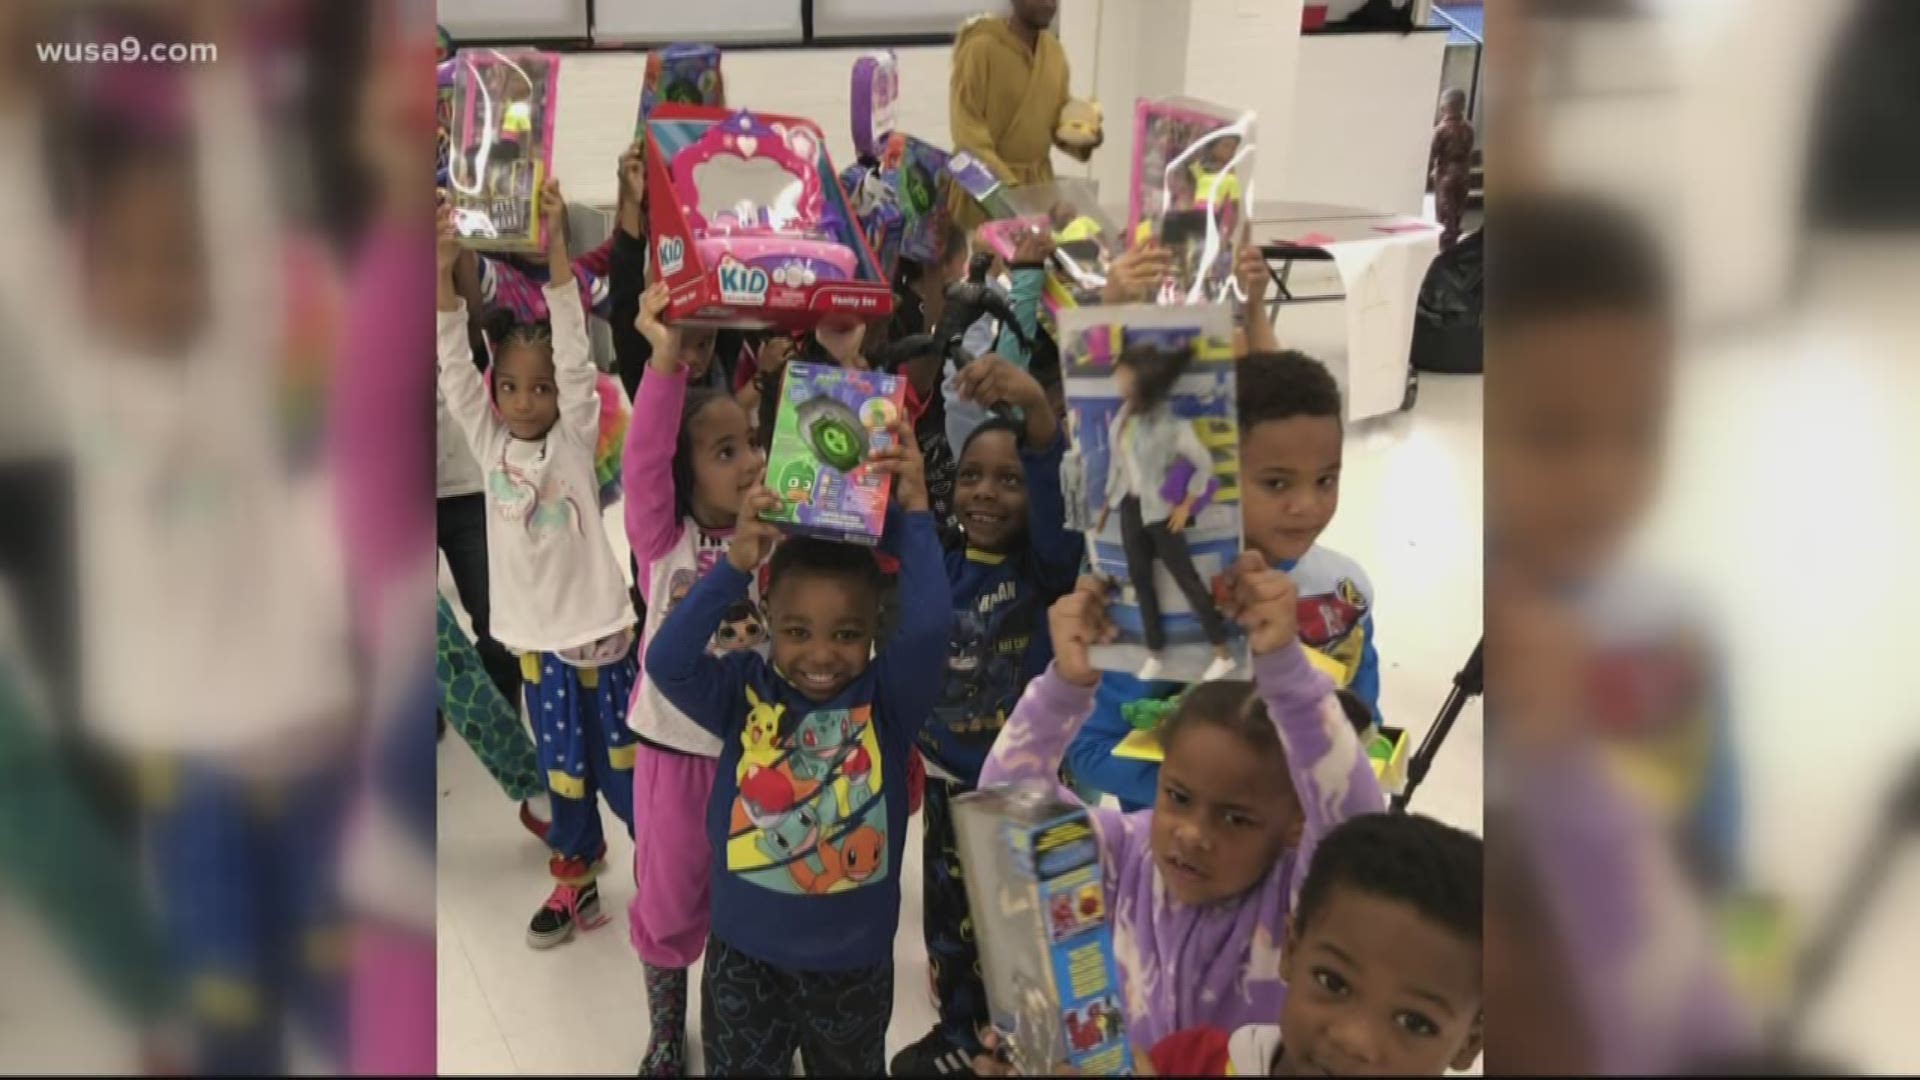 'These kids face things you could never imagine, but they come to school every day and smile, so why not give them that joy?' Azel Prather Jr. says.